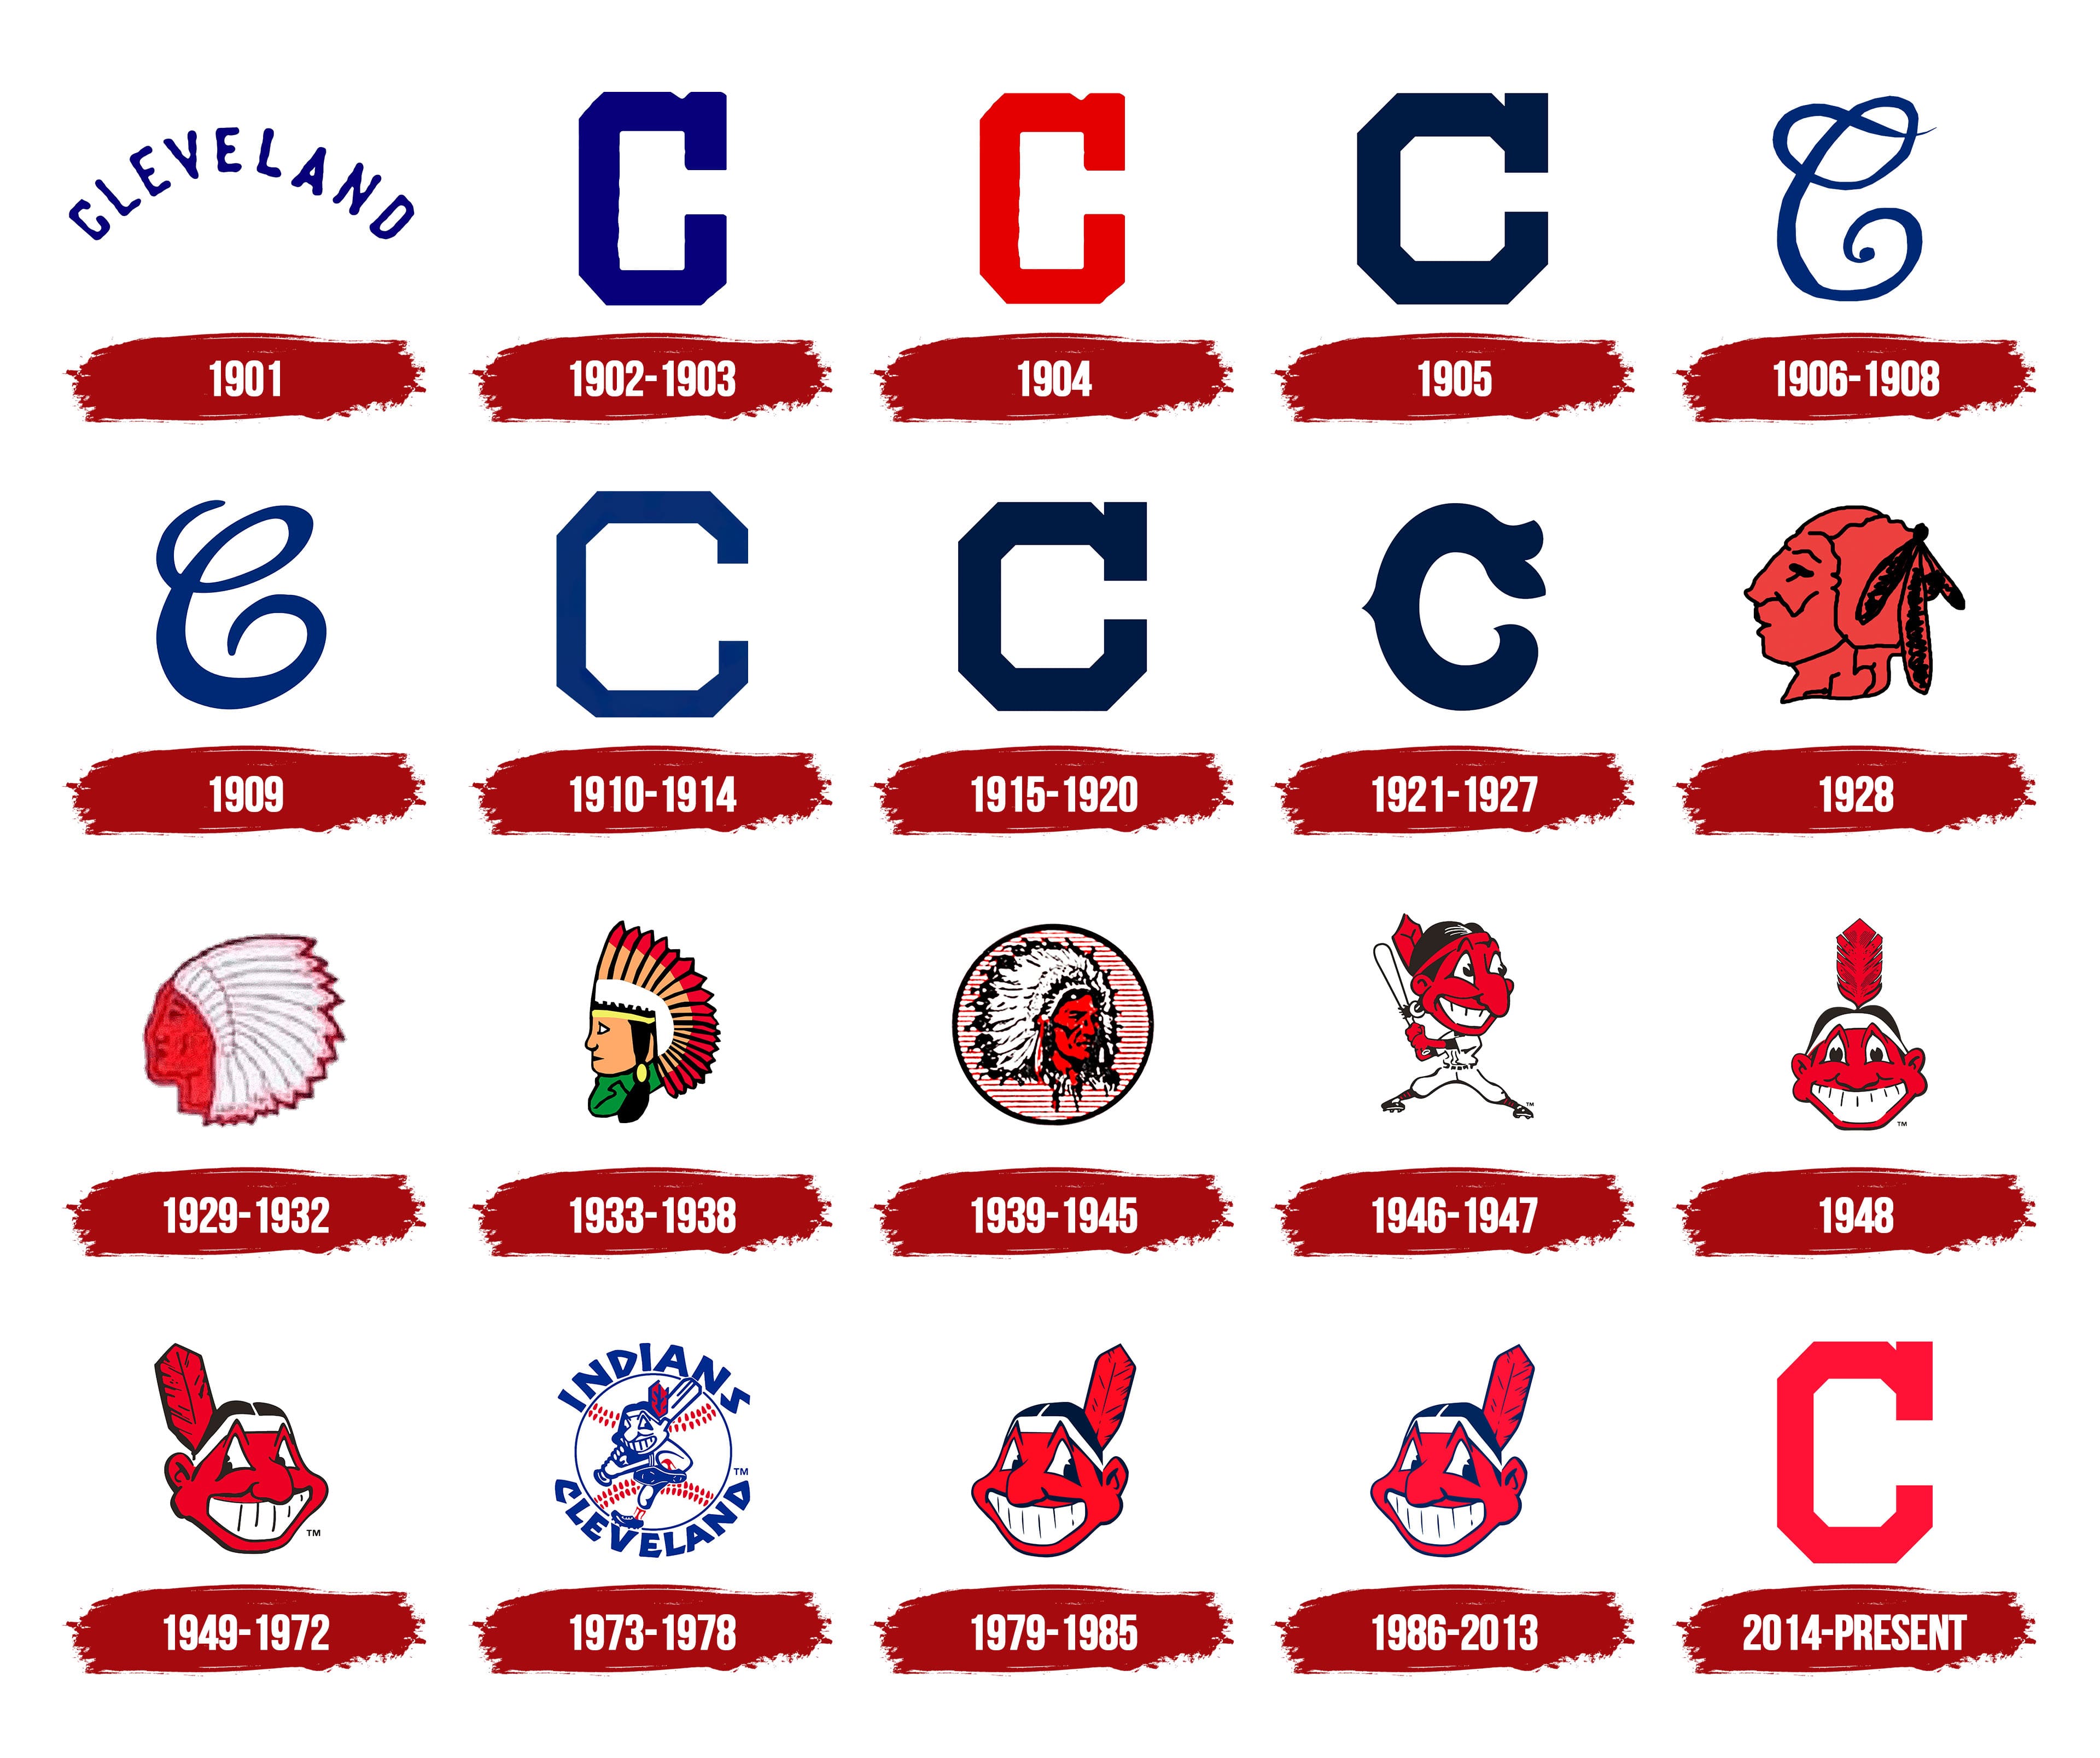 Since 1928 - A Pictorial History of the Cleveland Indians and Chief Wahoo  Logos - ICT News